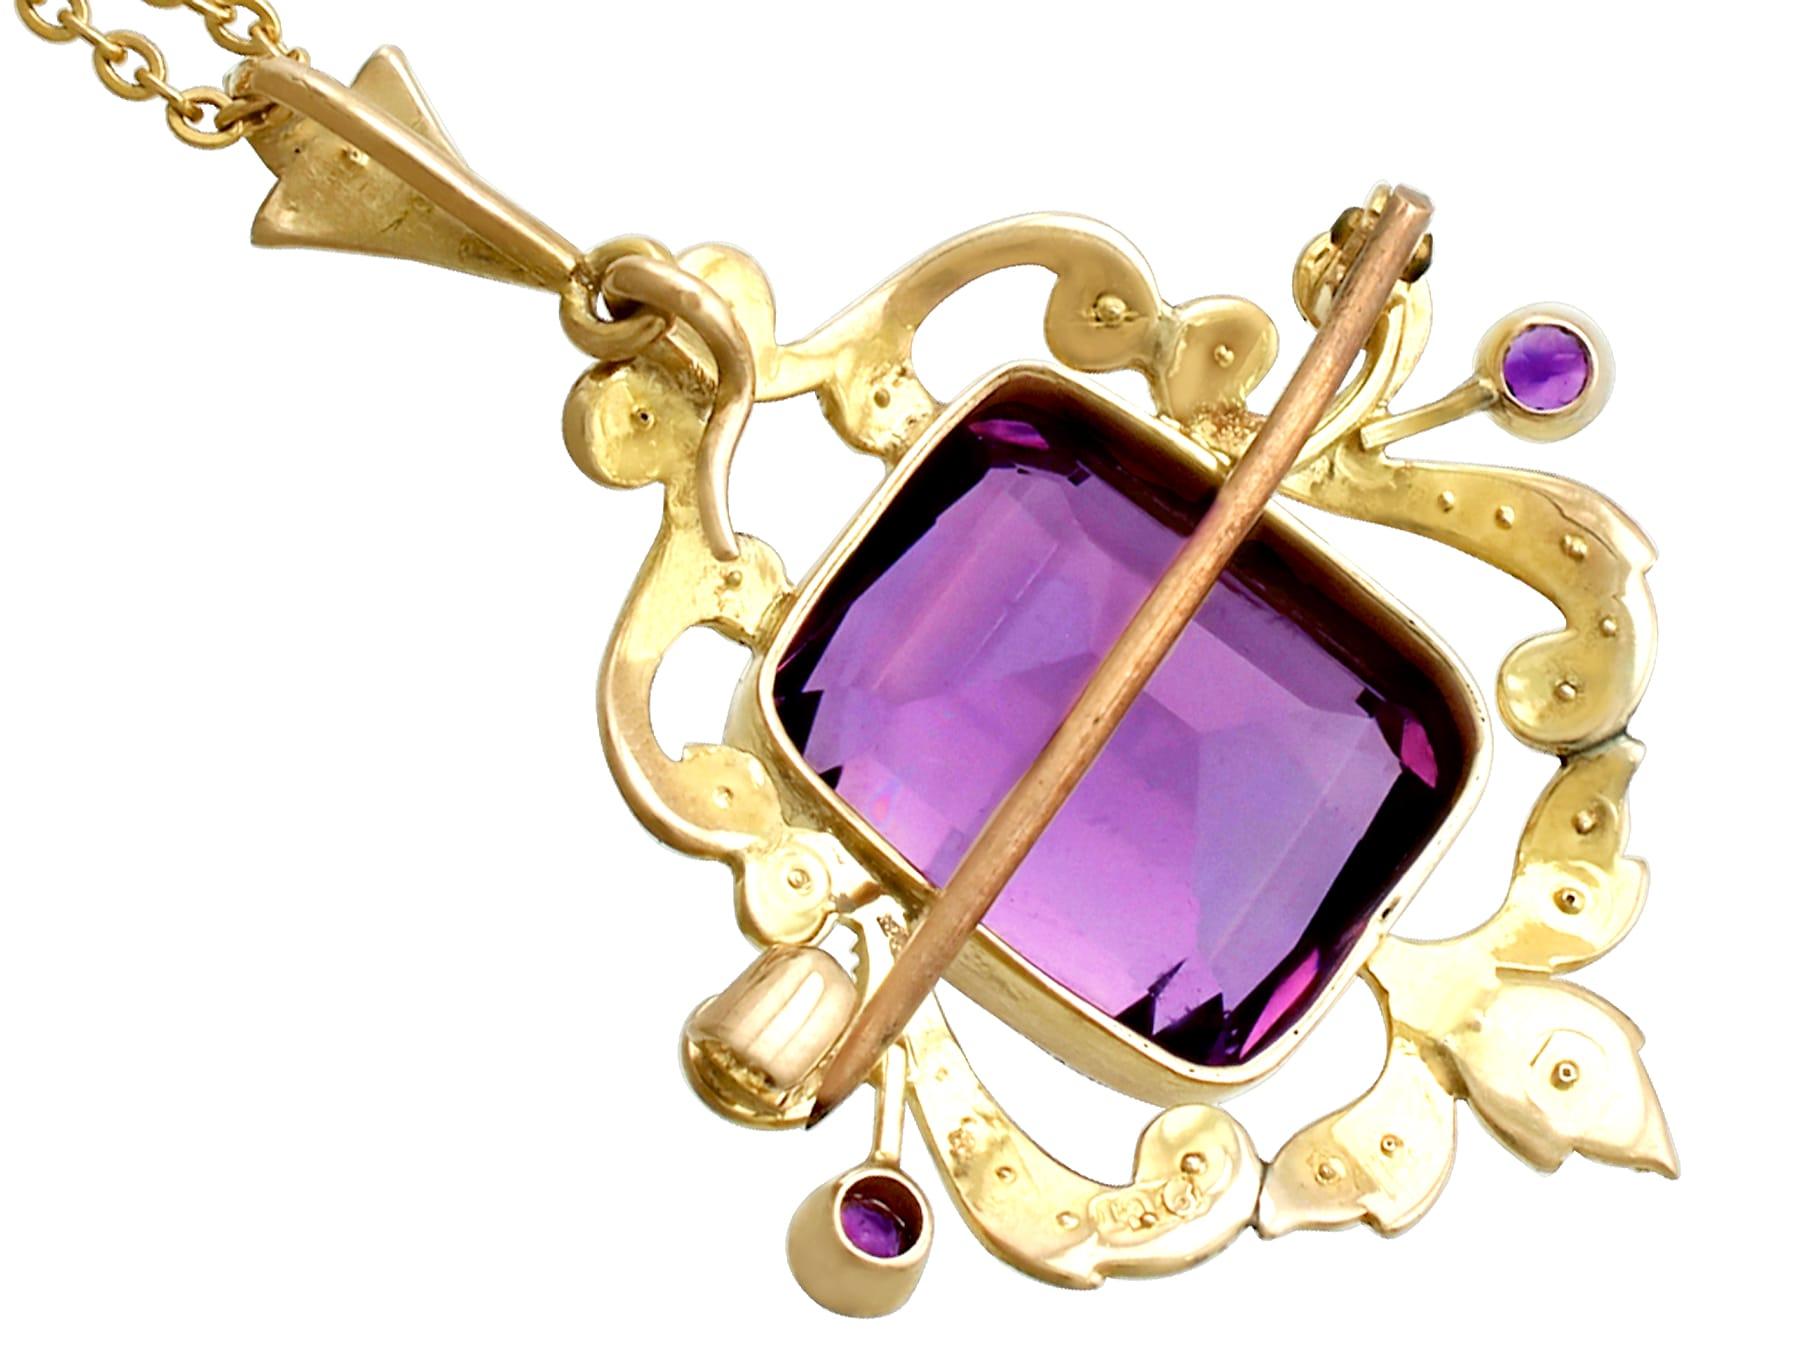 Antique 11.09 Carat Amethyst and Pearl Yellow Gold Pendant In Excellent Condition For Sale In Jesmond, Newcastle Upon Tyne